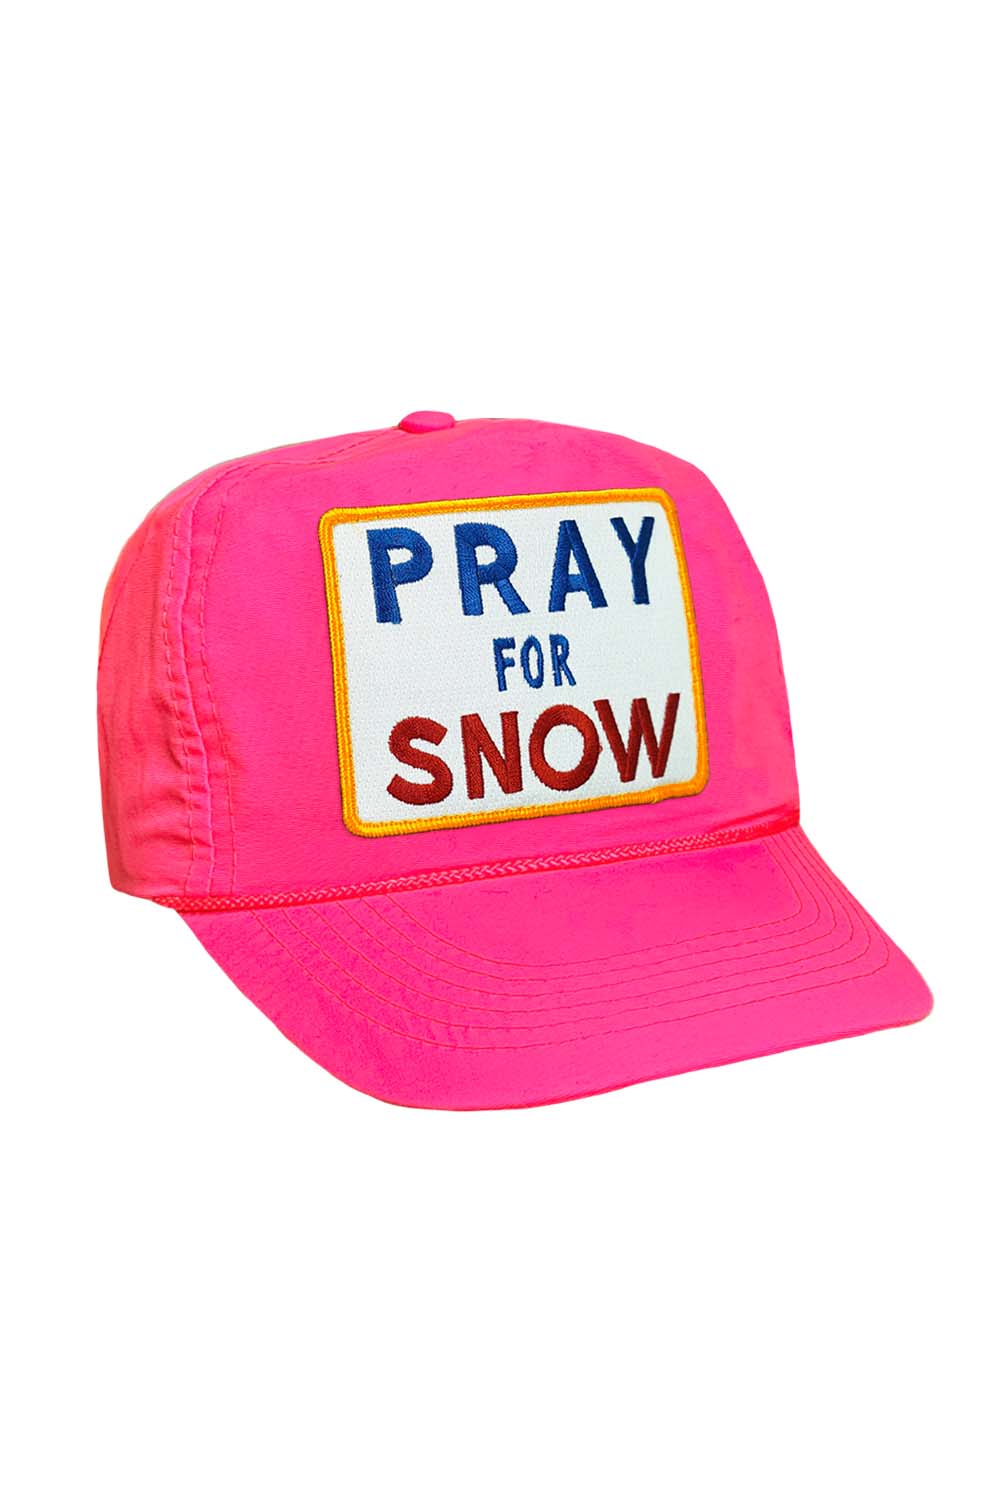 Aviator Nation Pray for Snow Vintage Low Rise Trucker Hat